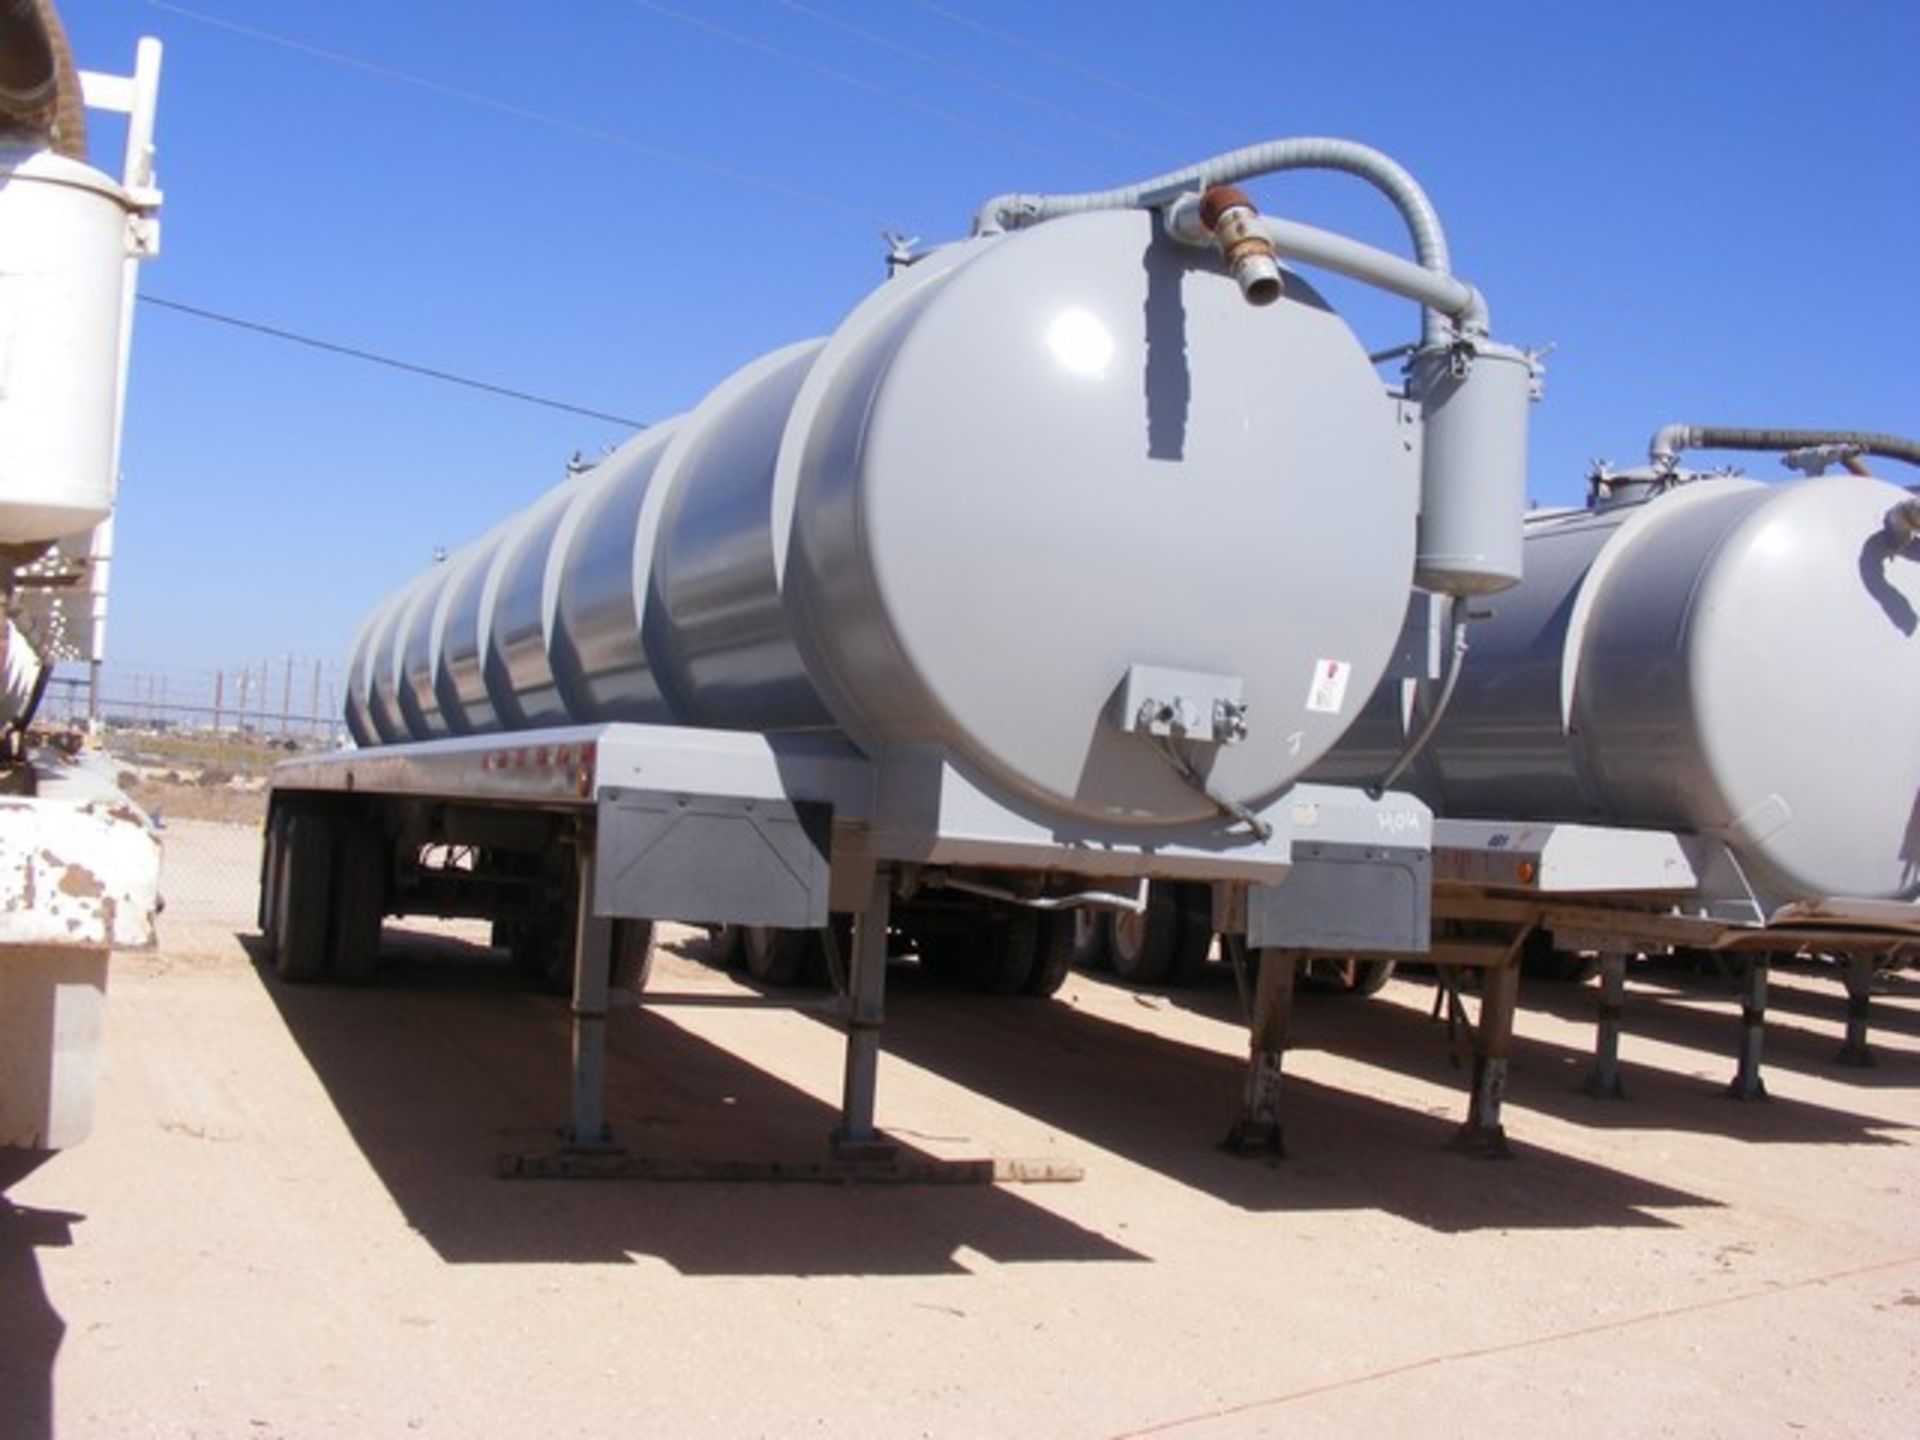 Located in YARD 1 - Midland, TX (404) (X) 2014 TANKO 130 BBL T/A VAC TRAILER, VIN- - Image 2 of 5